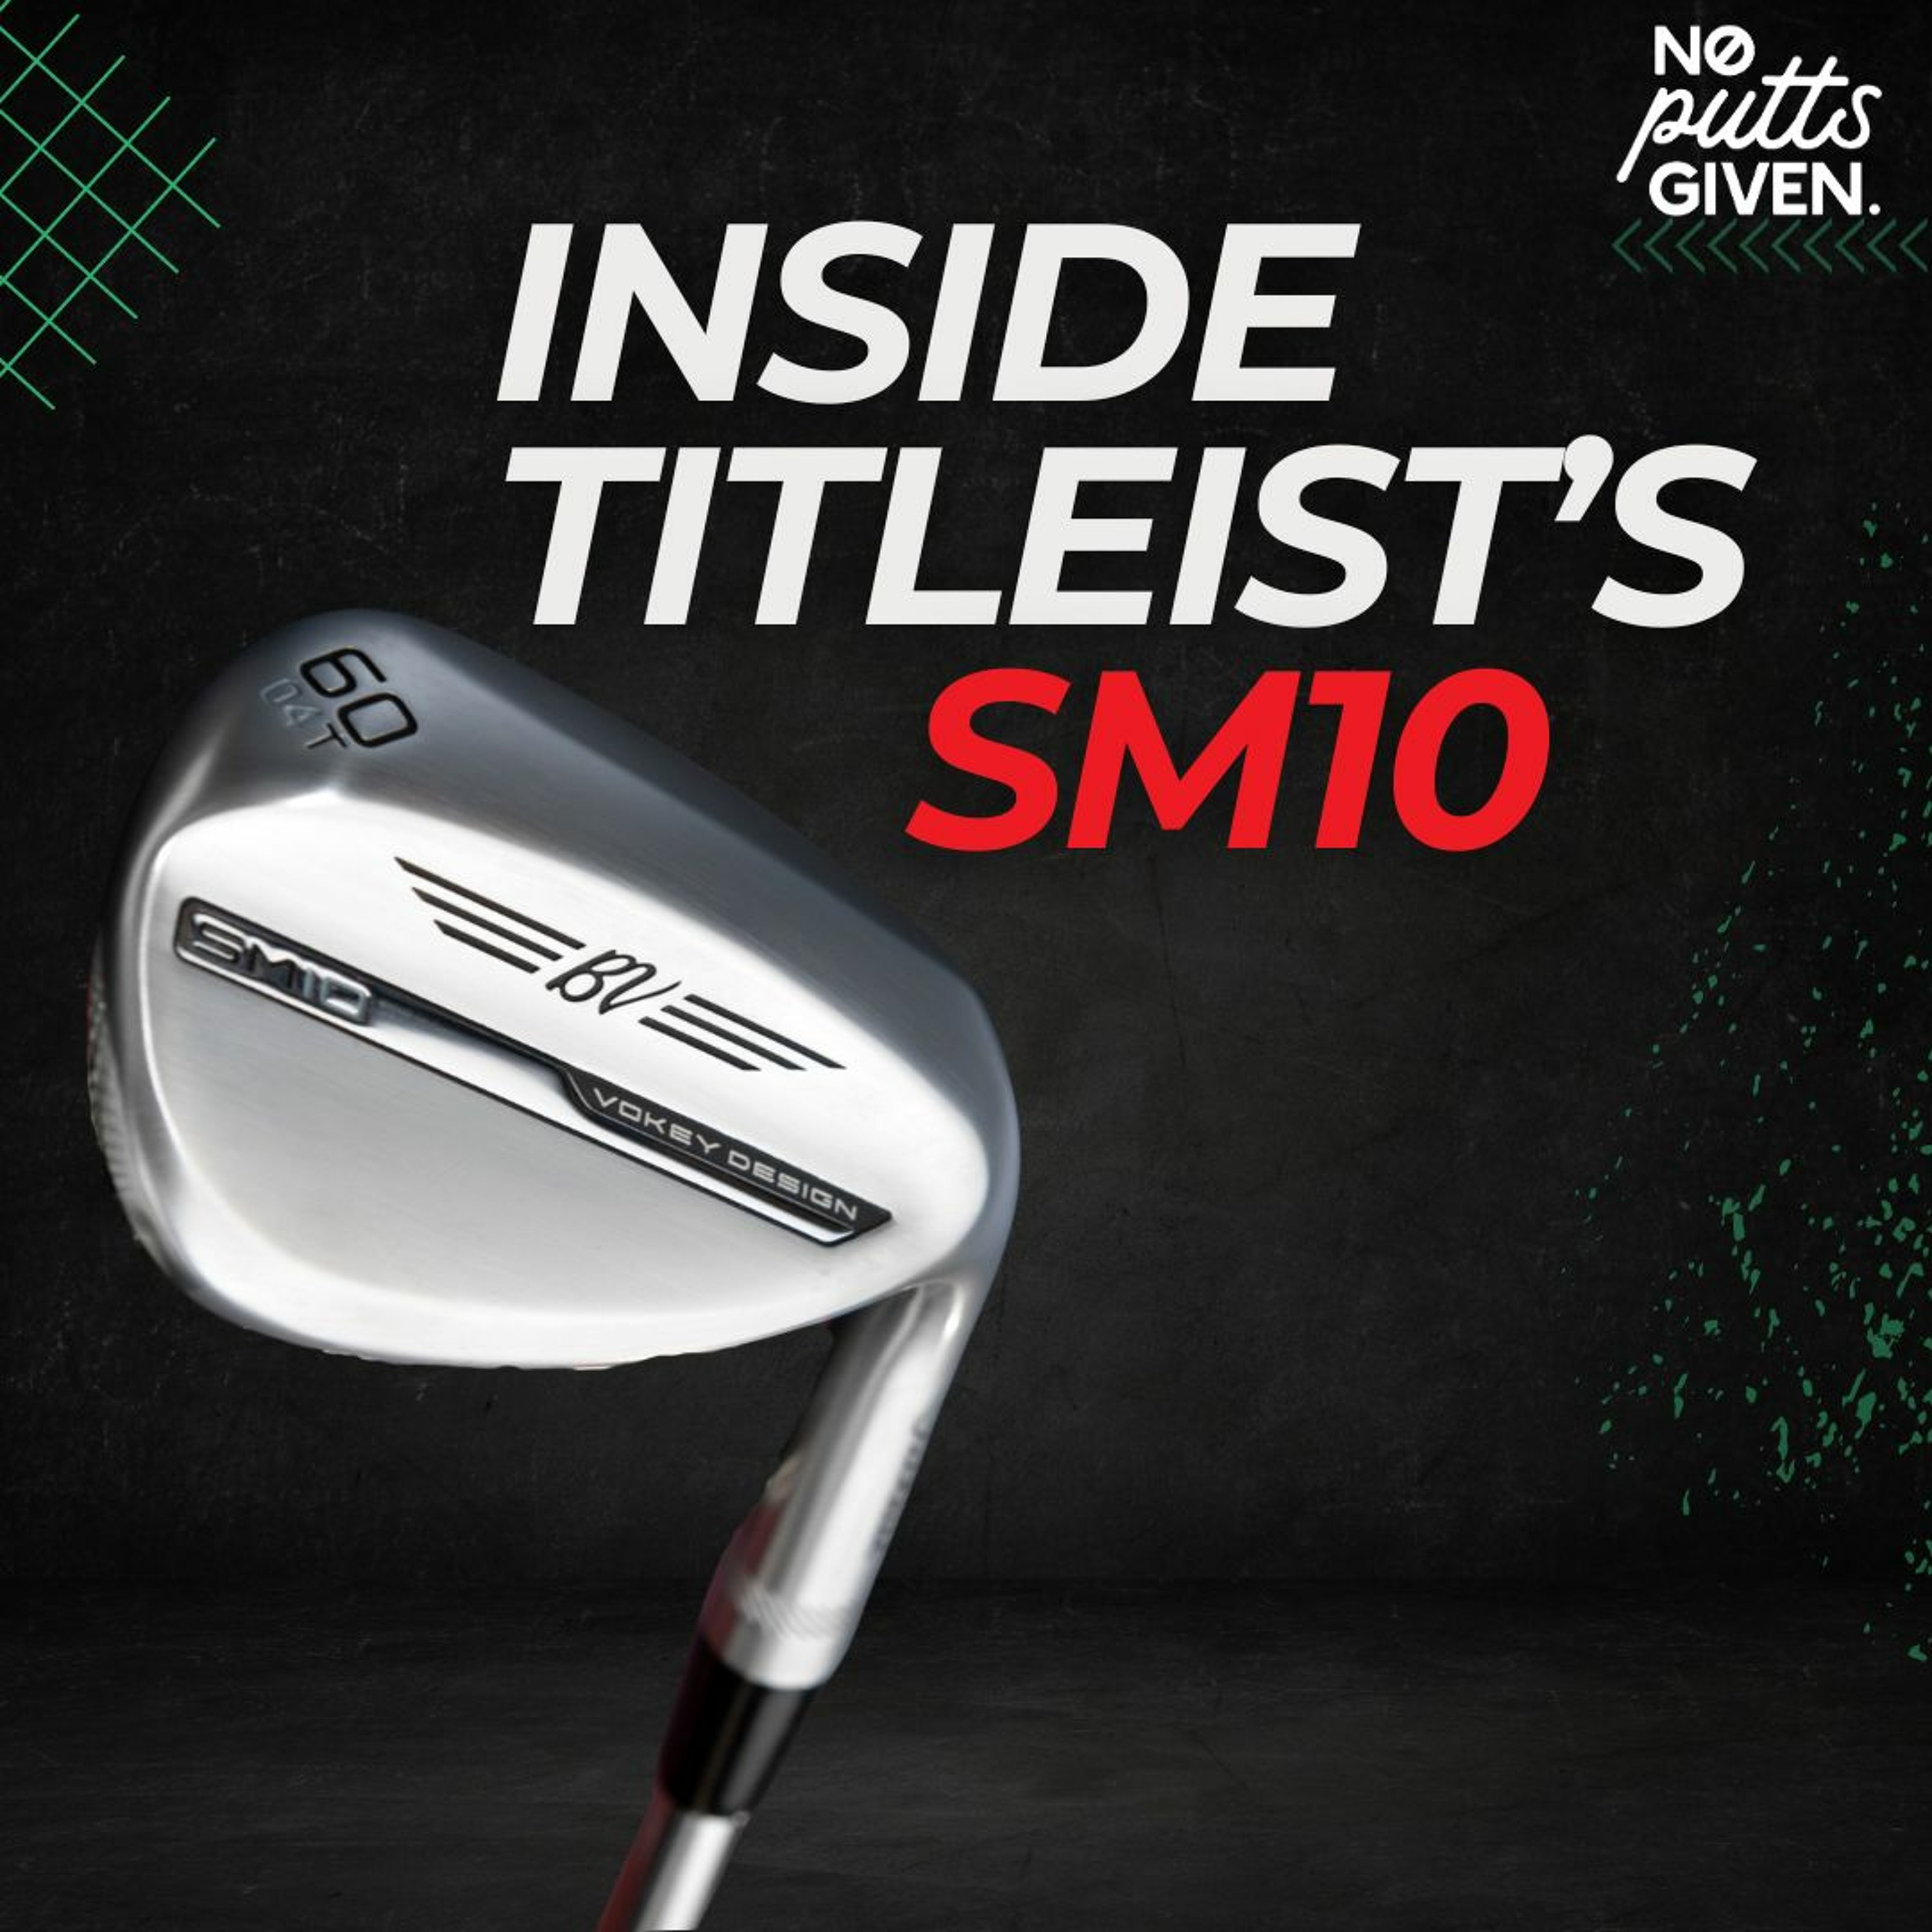 The Truth About Vokey's New SM10 Wedges | No Putts Given